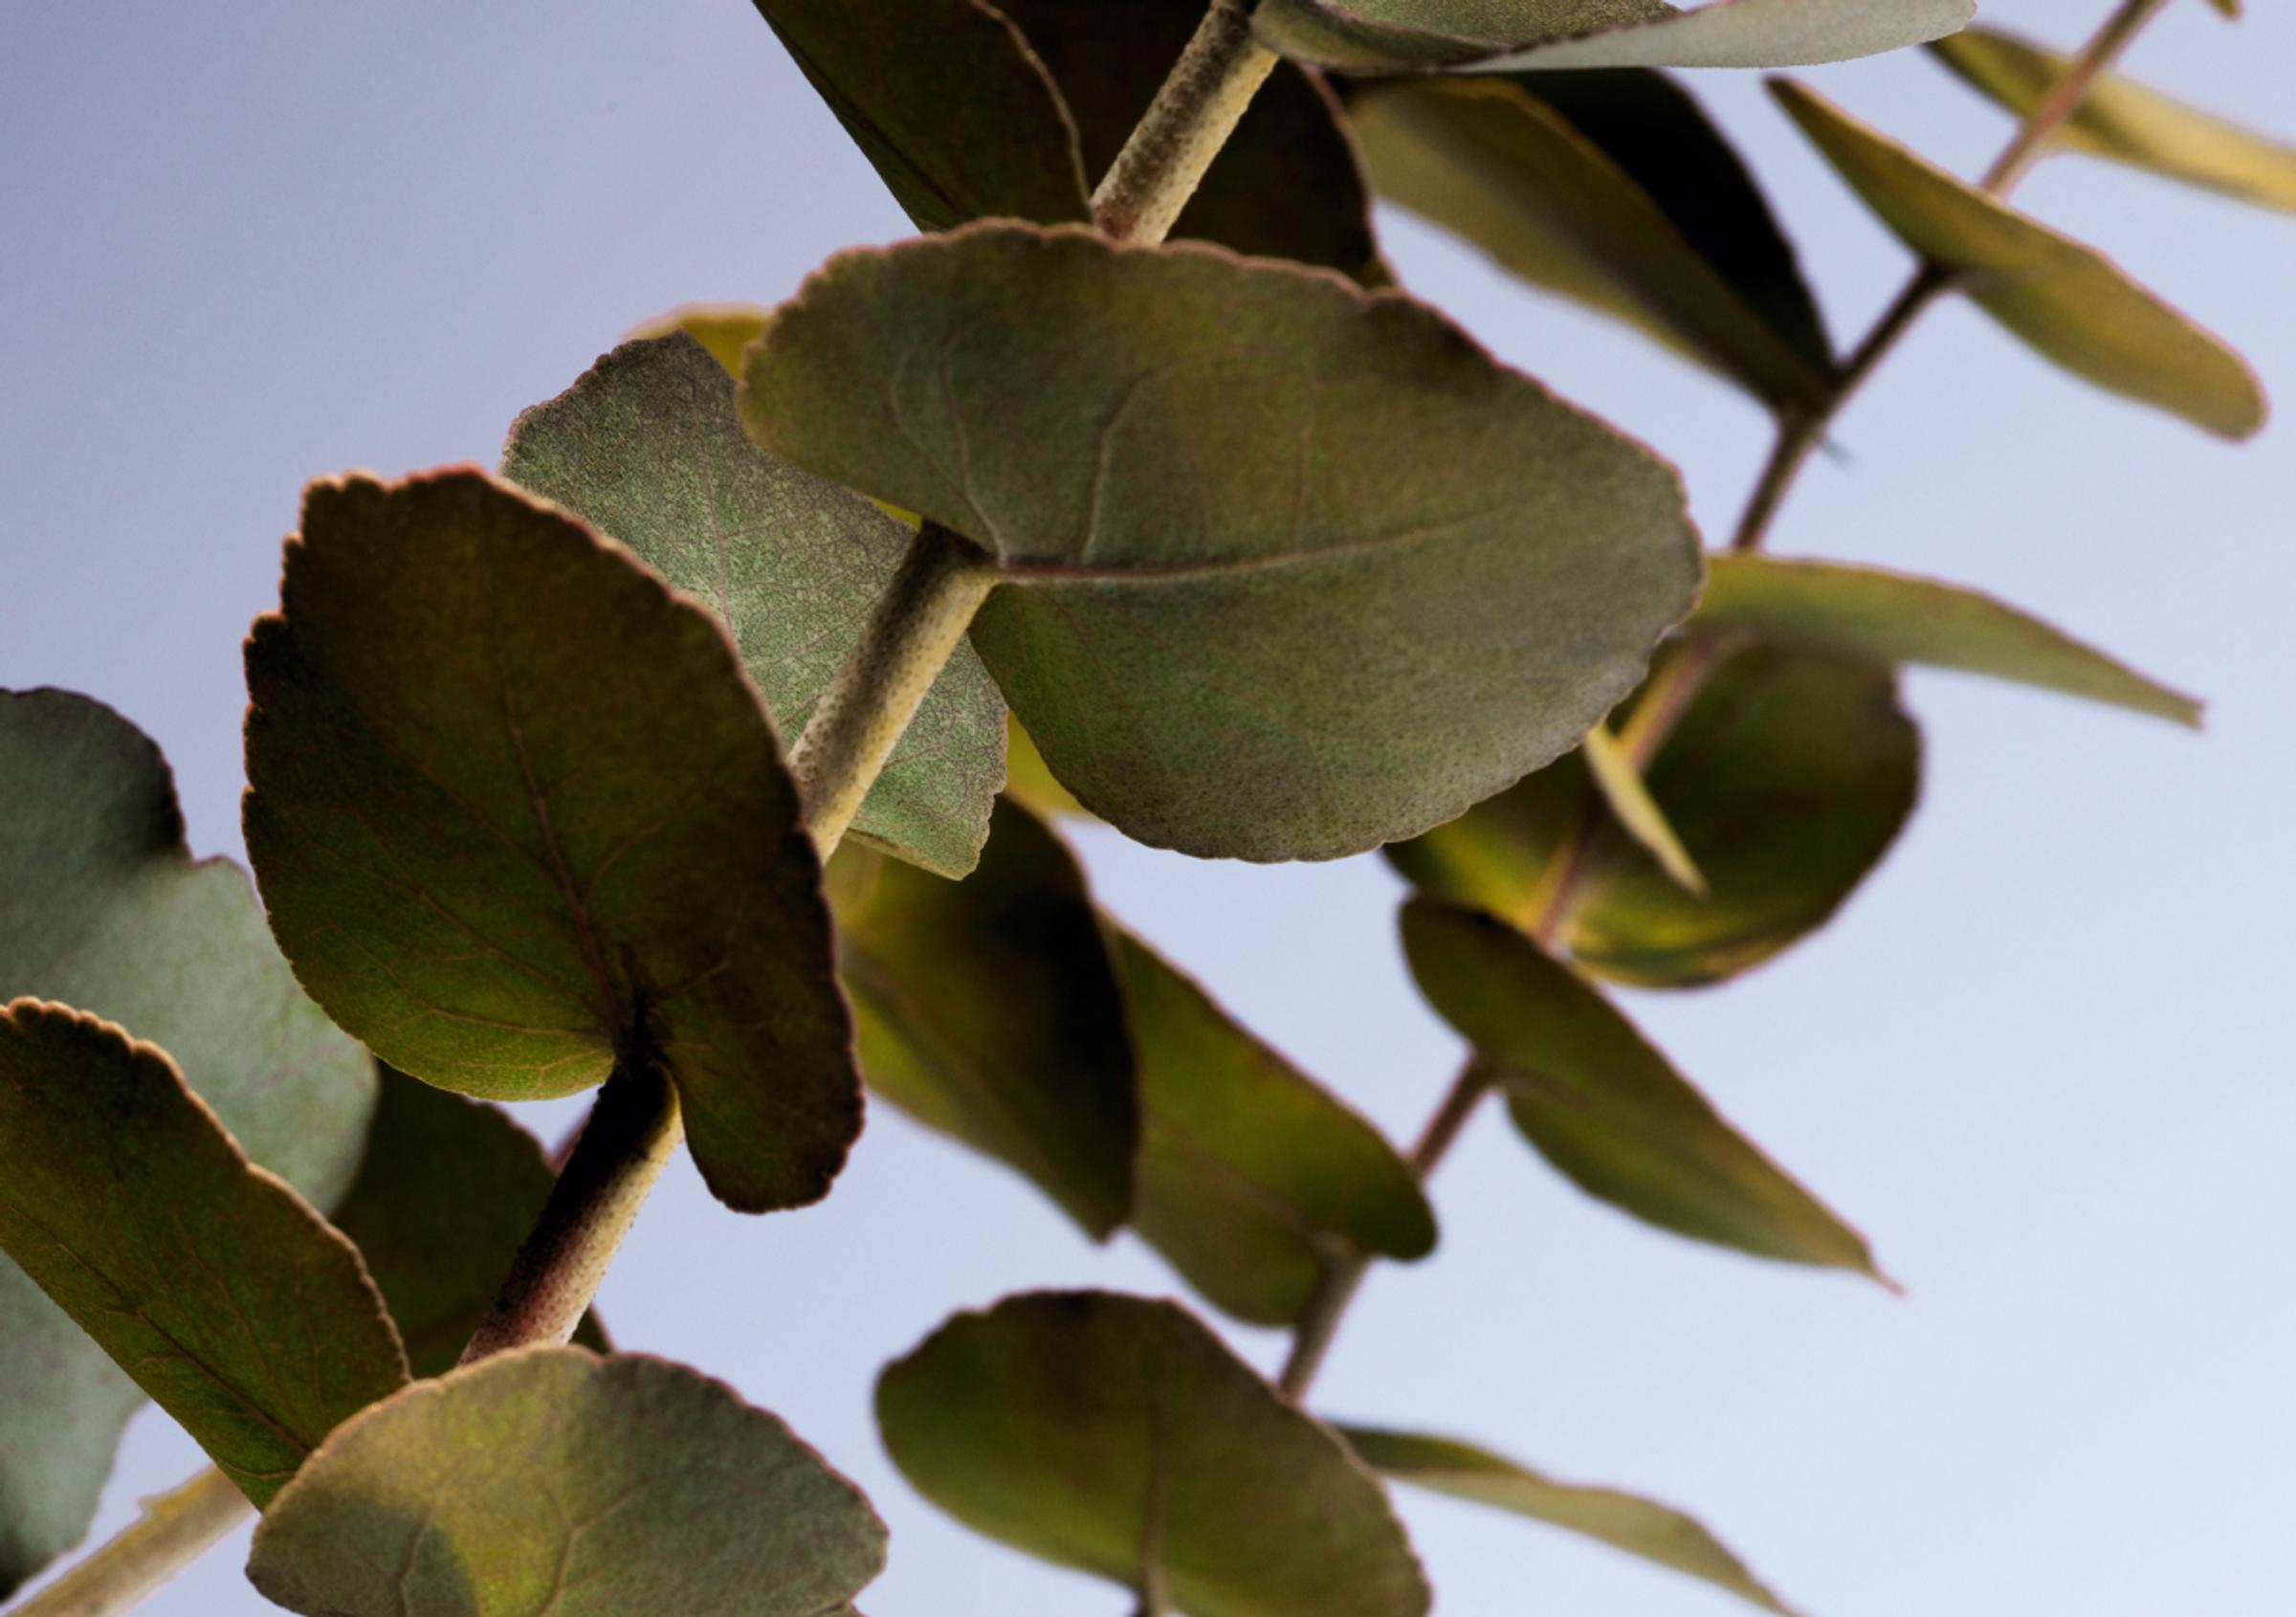 A few branches of green eucalyptus are shown against a light blue backdrop.